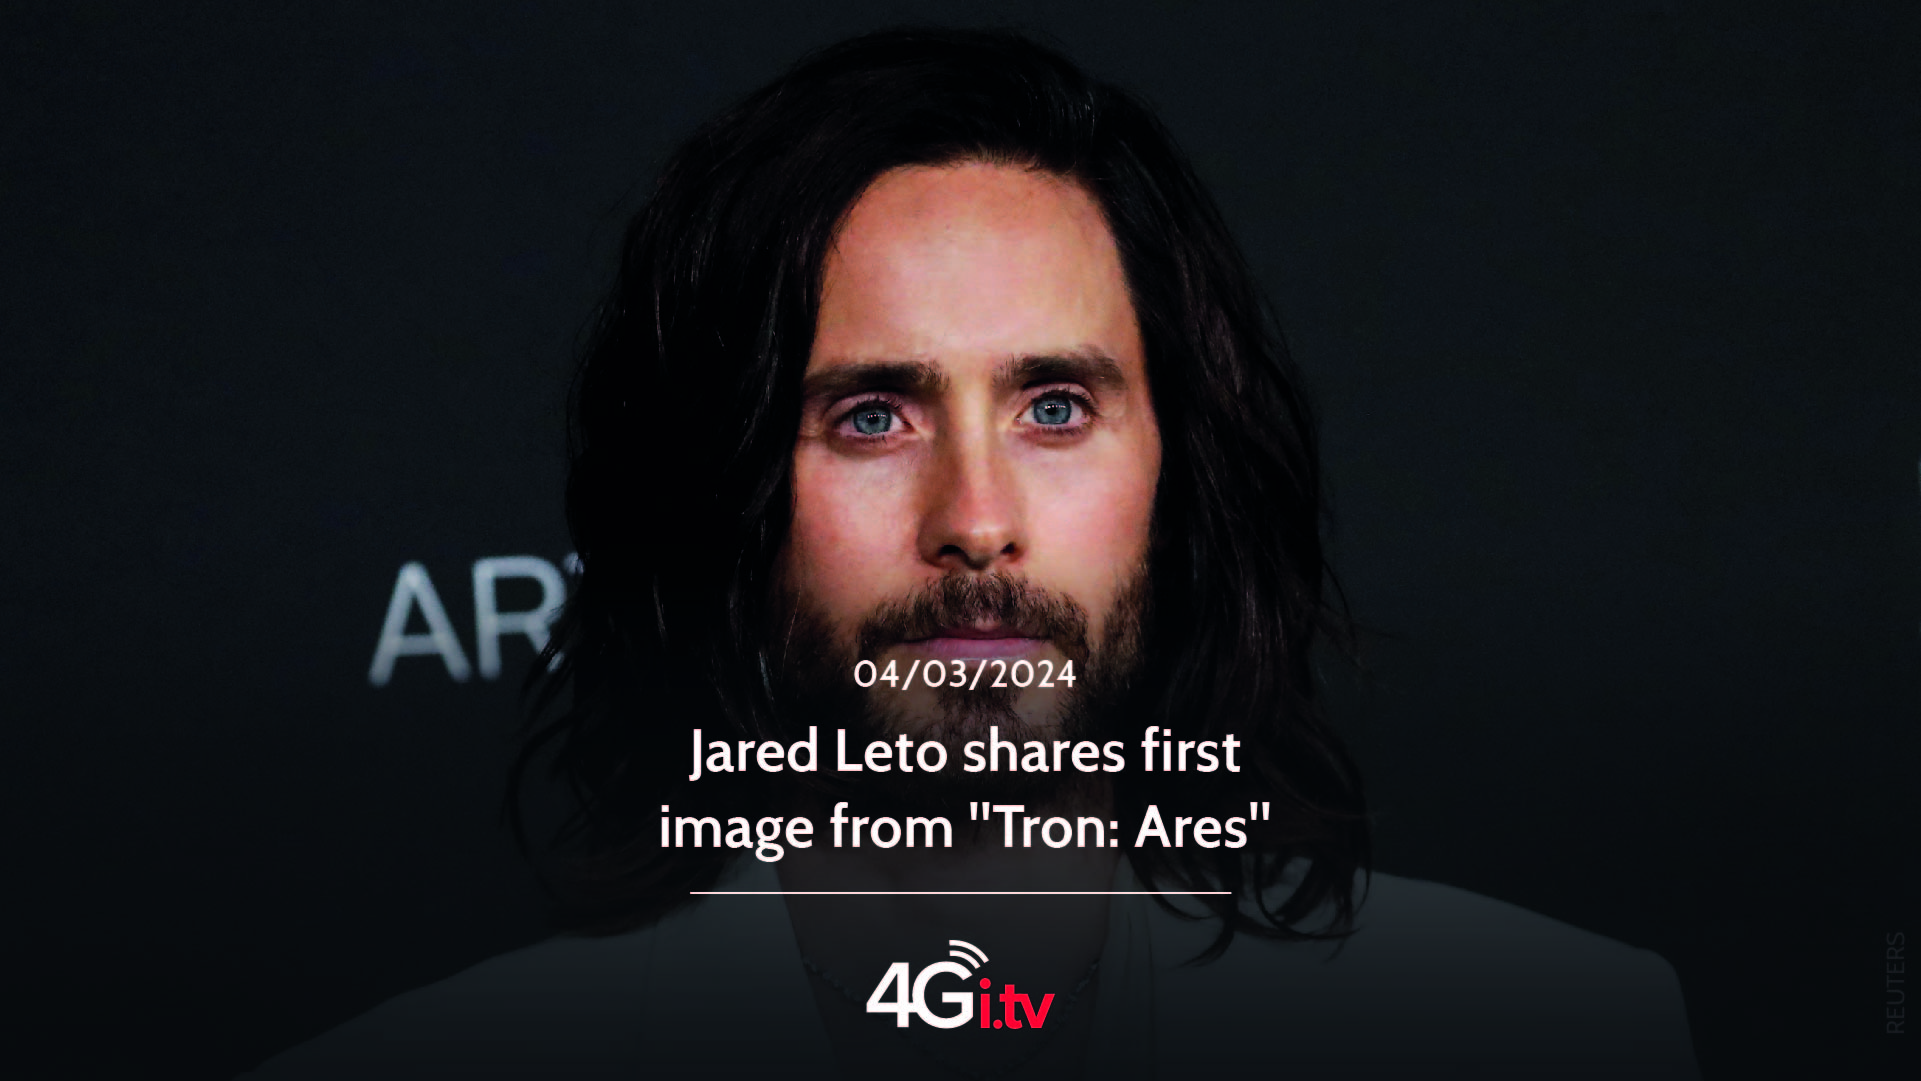 Подробнее о статье Jared Leto shares first image from “Tron: Ares”